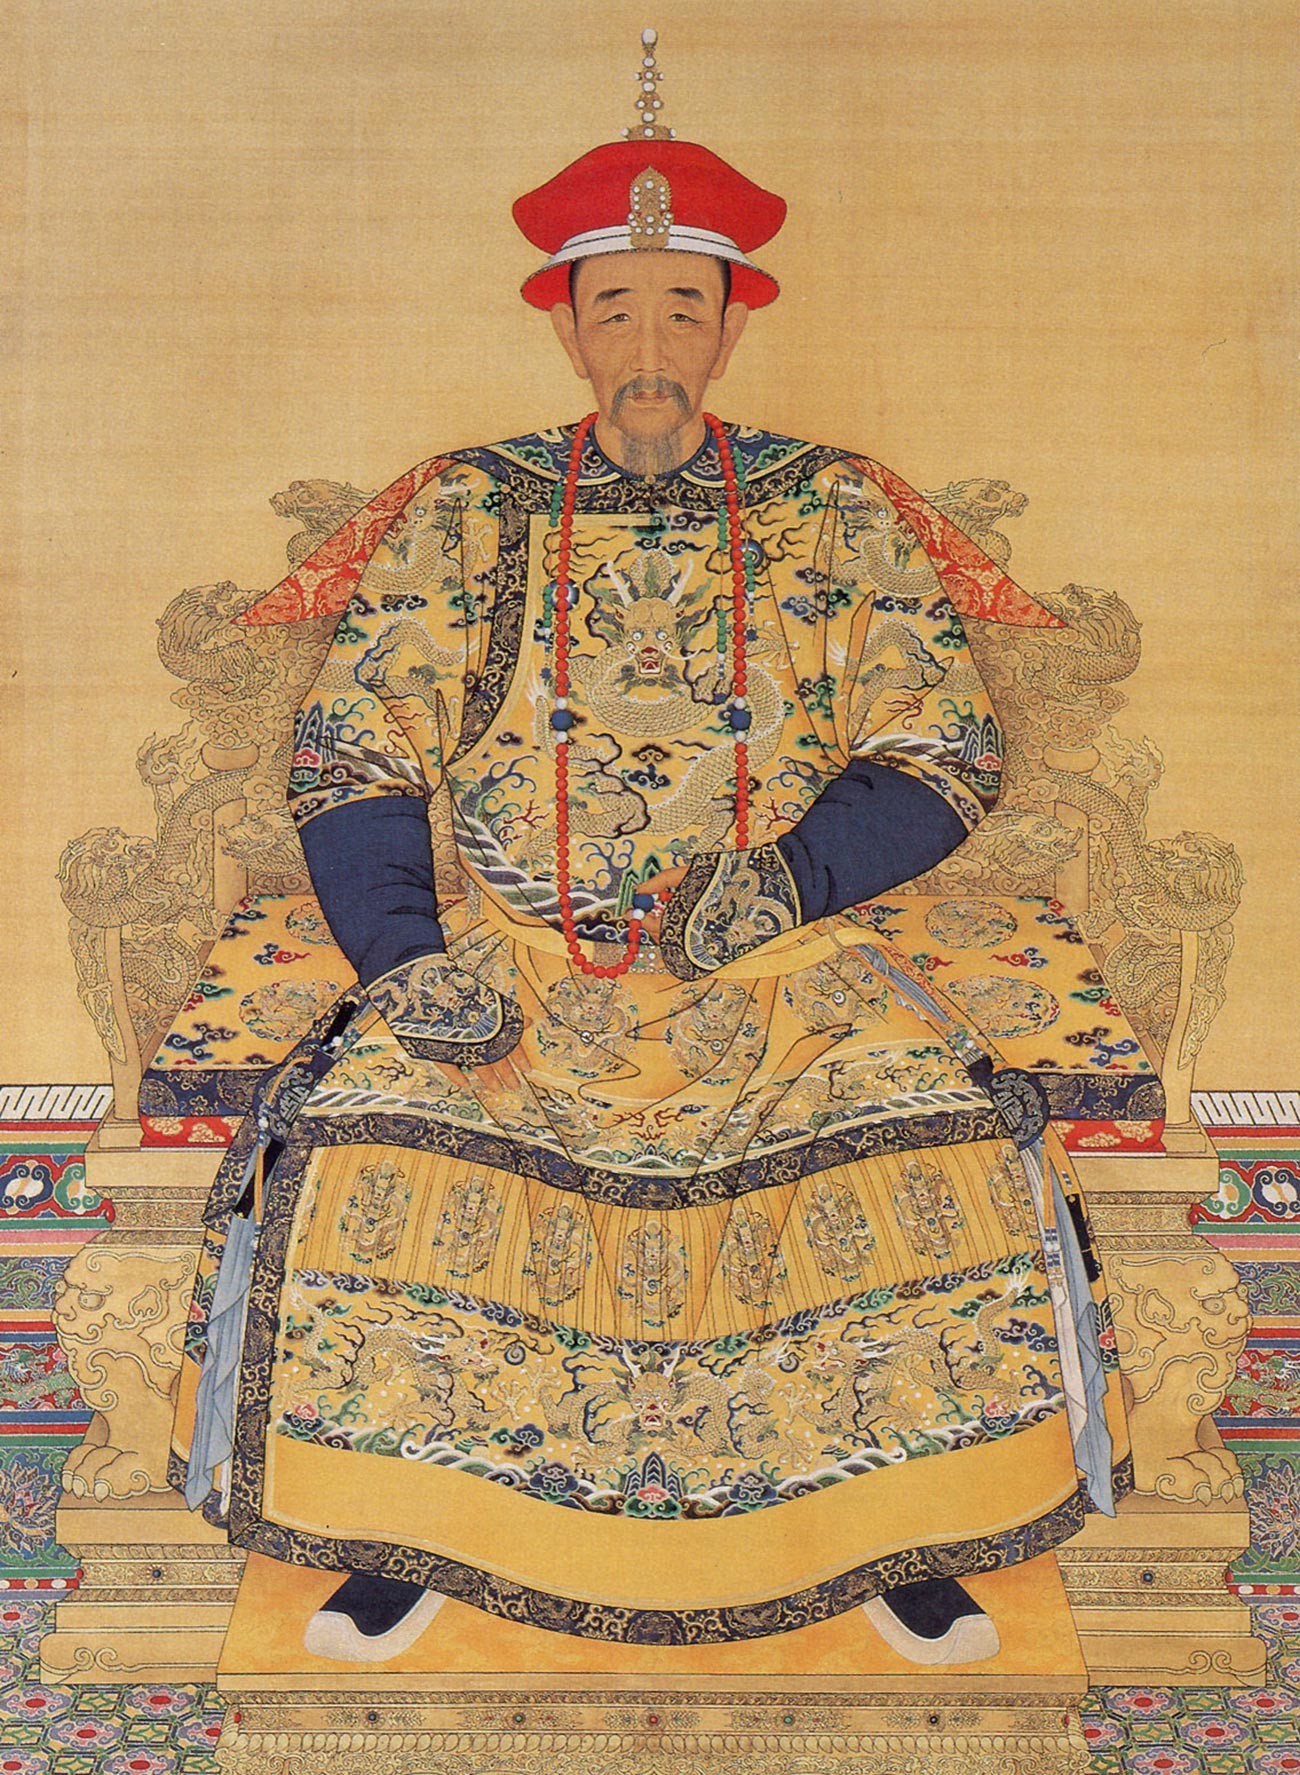 Kangxi Emperor, the fourth Emperor of the Qing dynasty.